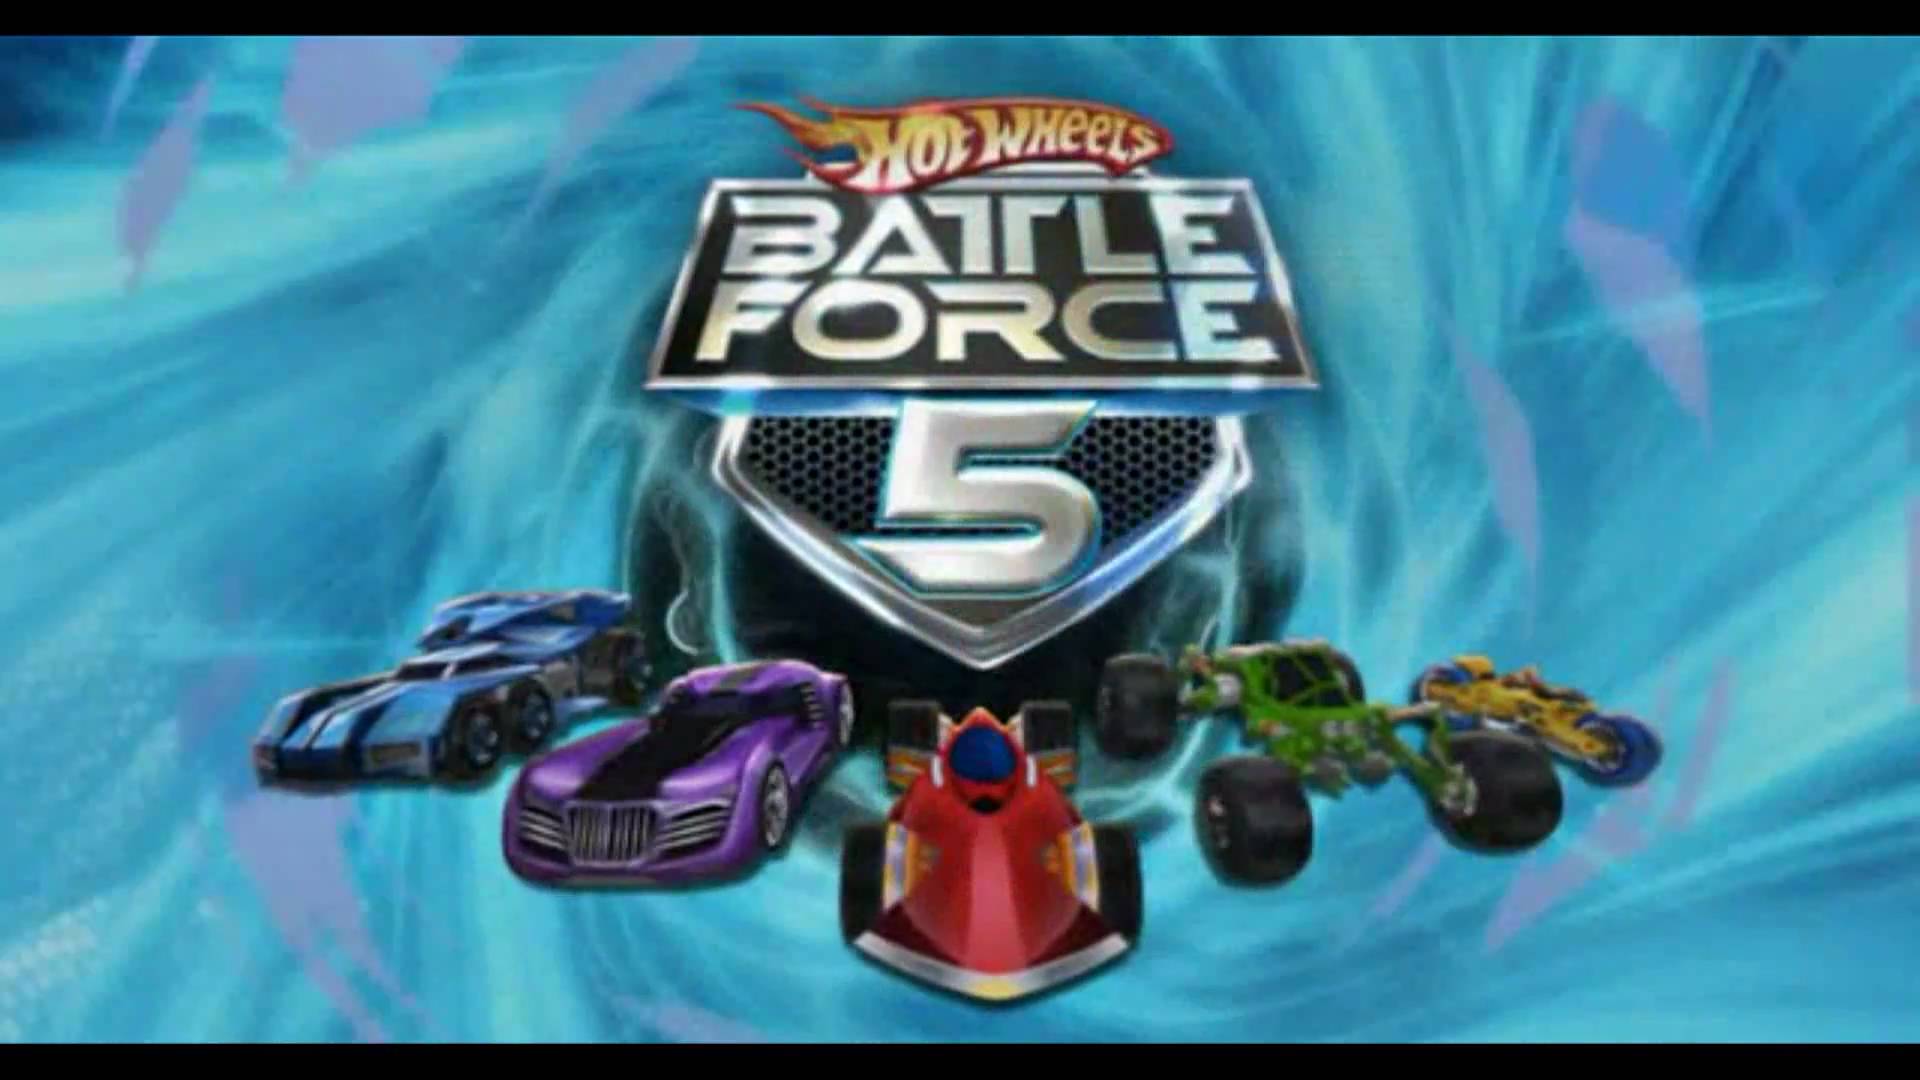 the battle force 5